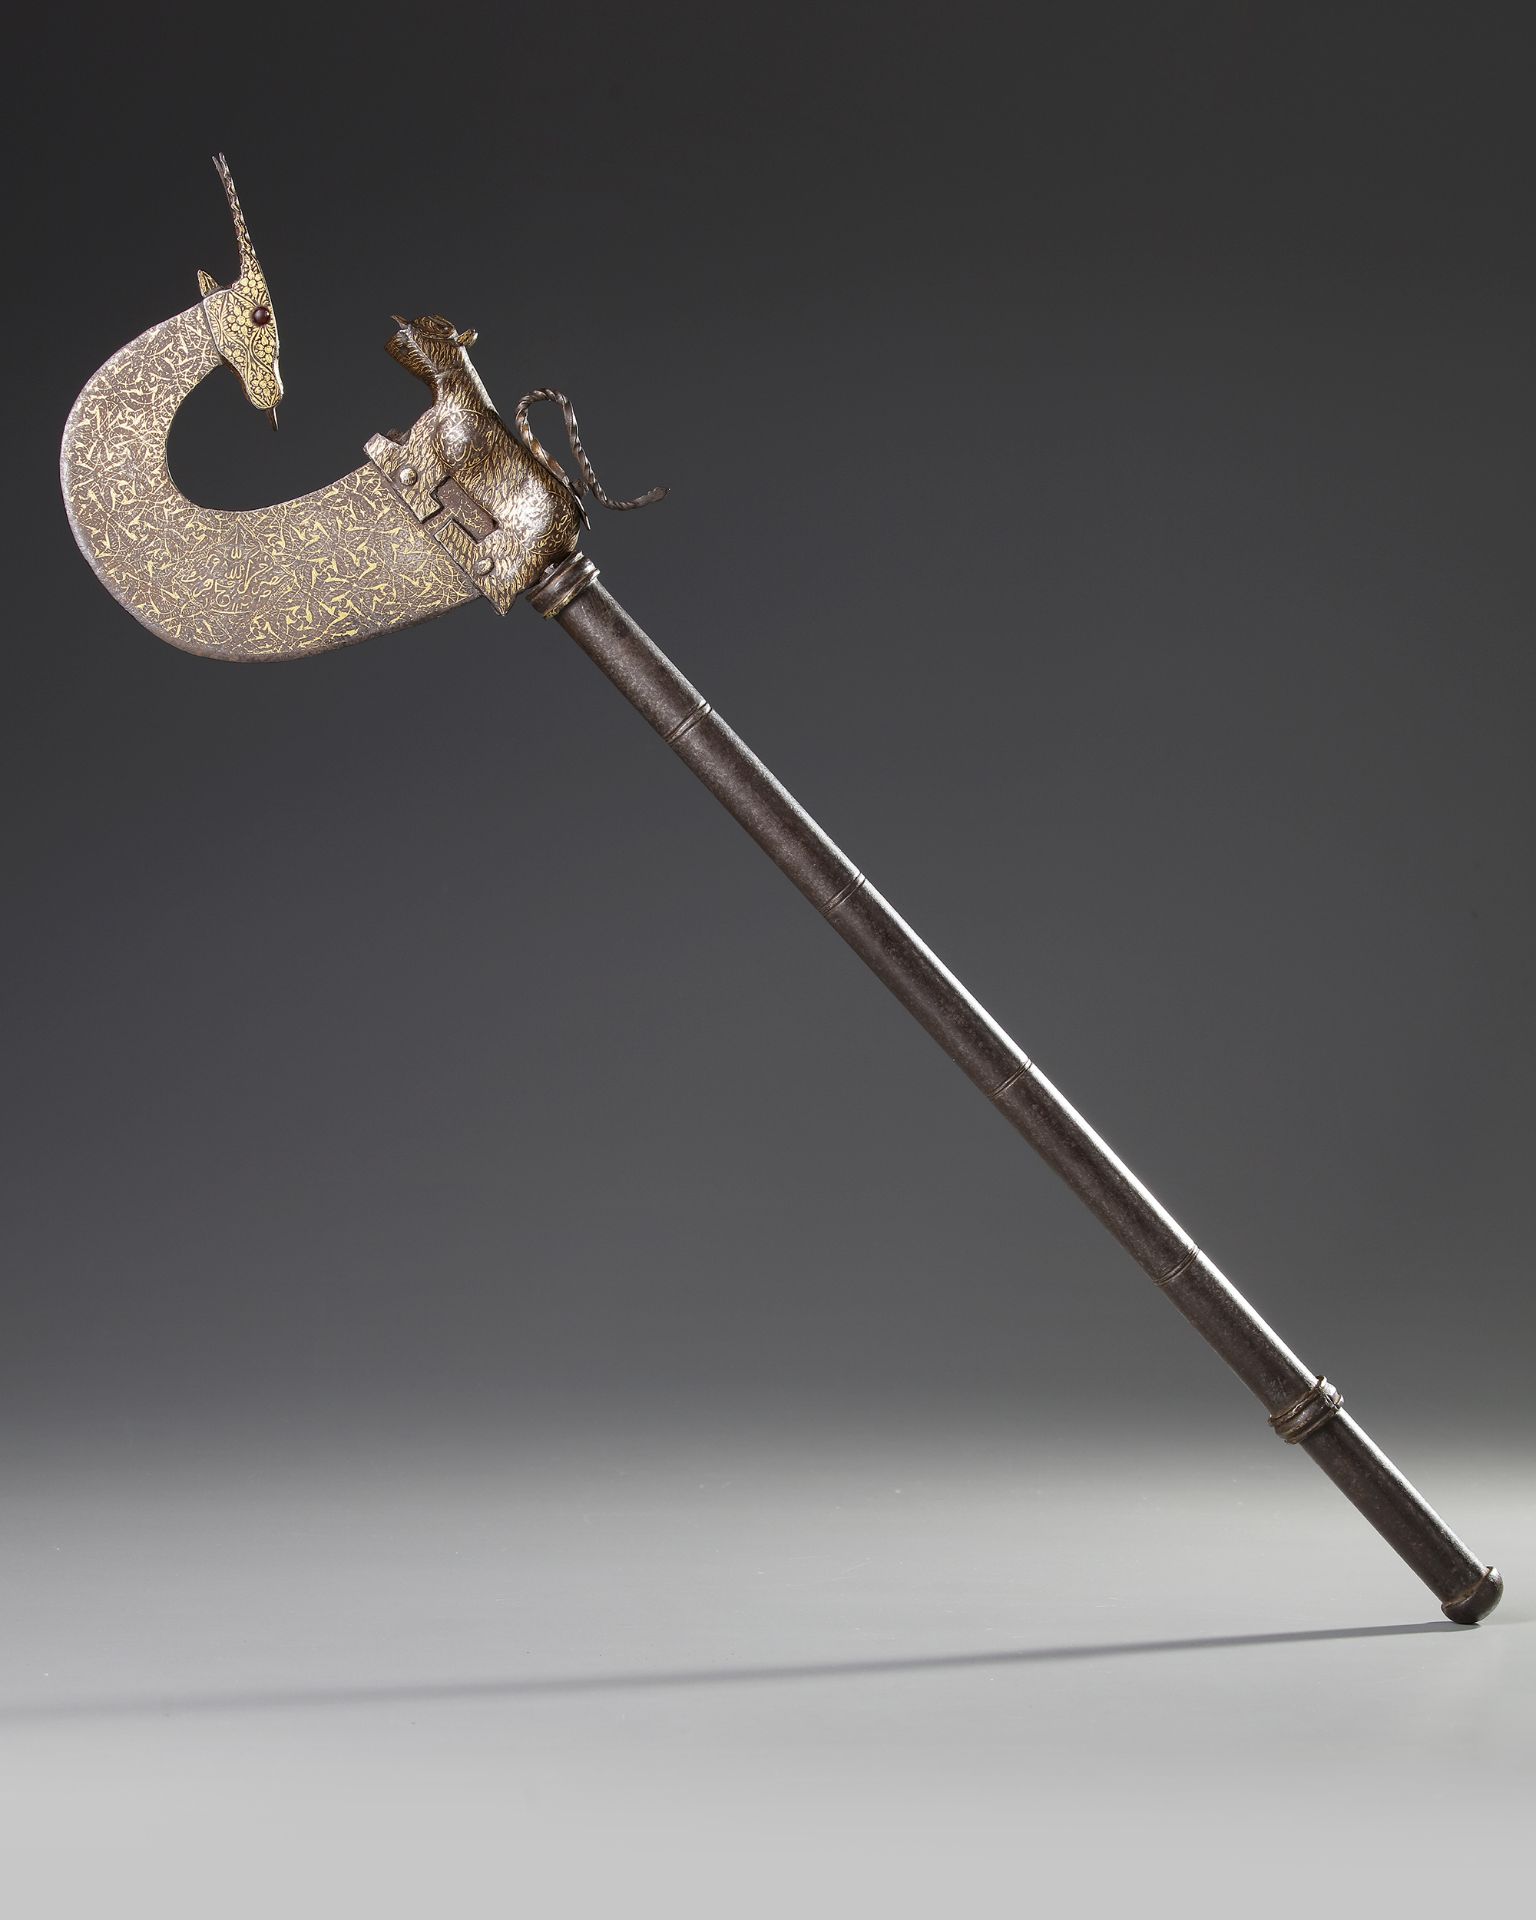 A CEREMONIAL GOLD-DAMASCENED STEEL AXE, INDIA, DATED 1120 AH/1708 AD